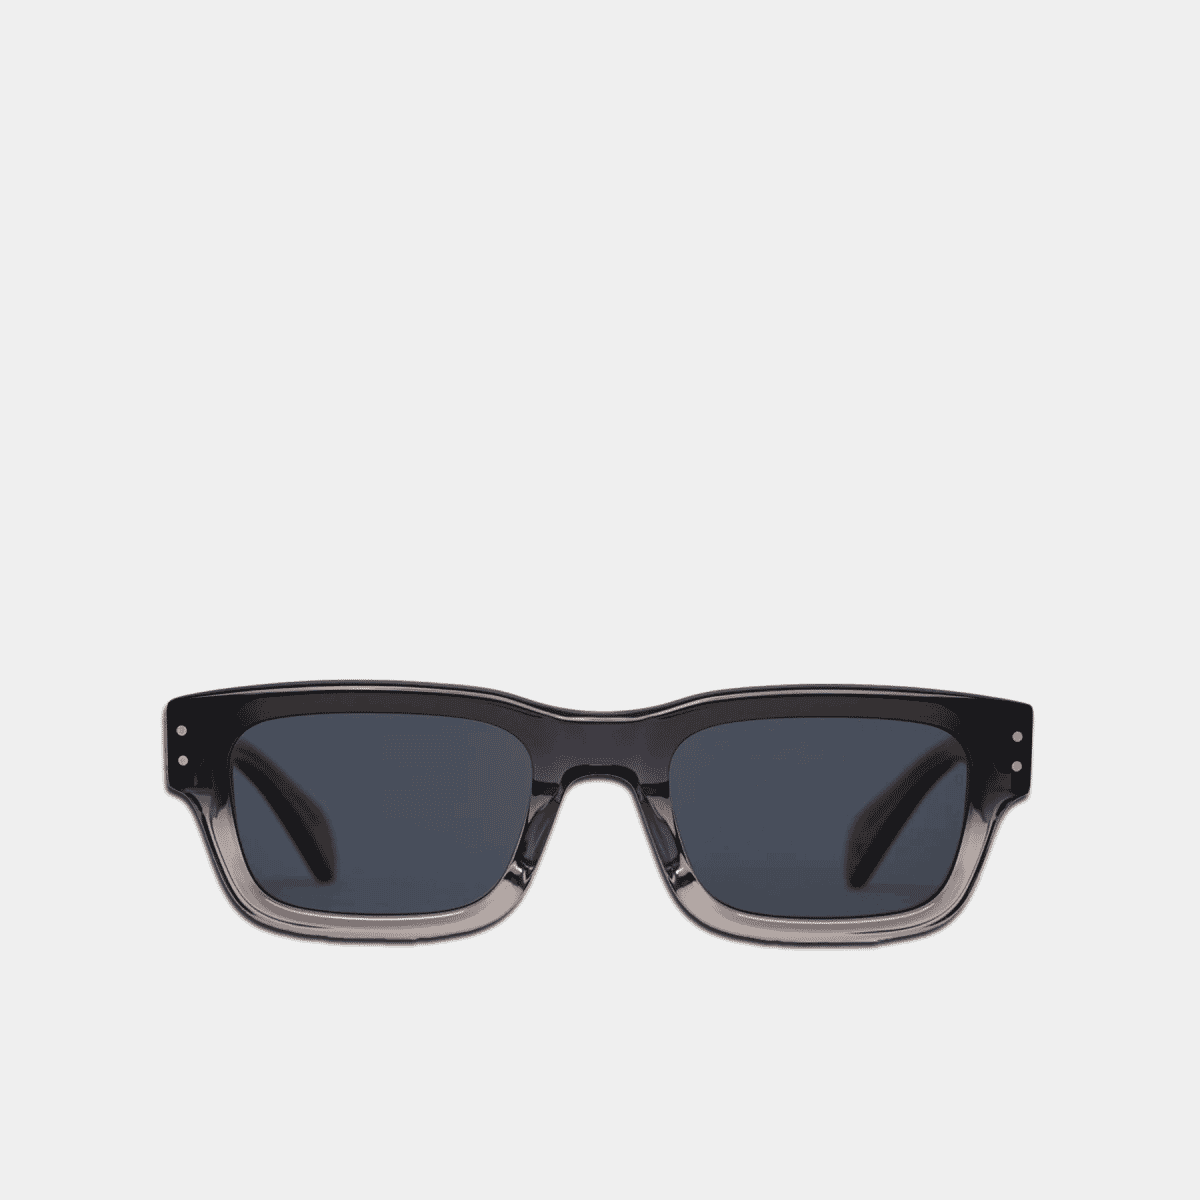 Best Sunglasses for a Triangle Face Shape | Warby Parker